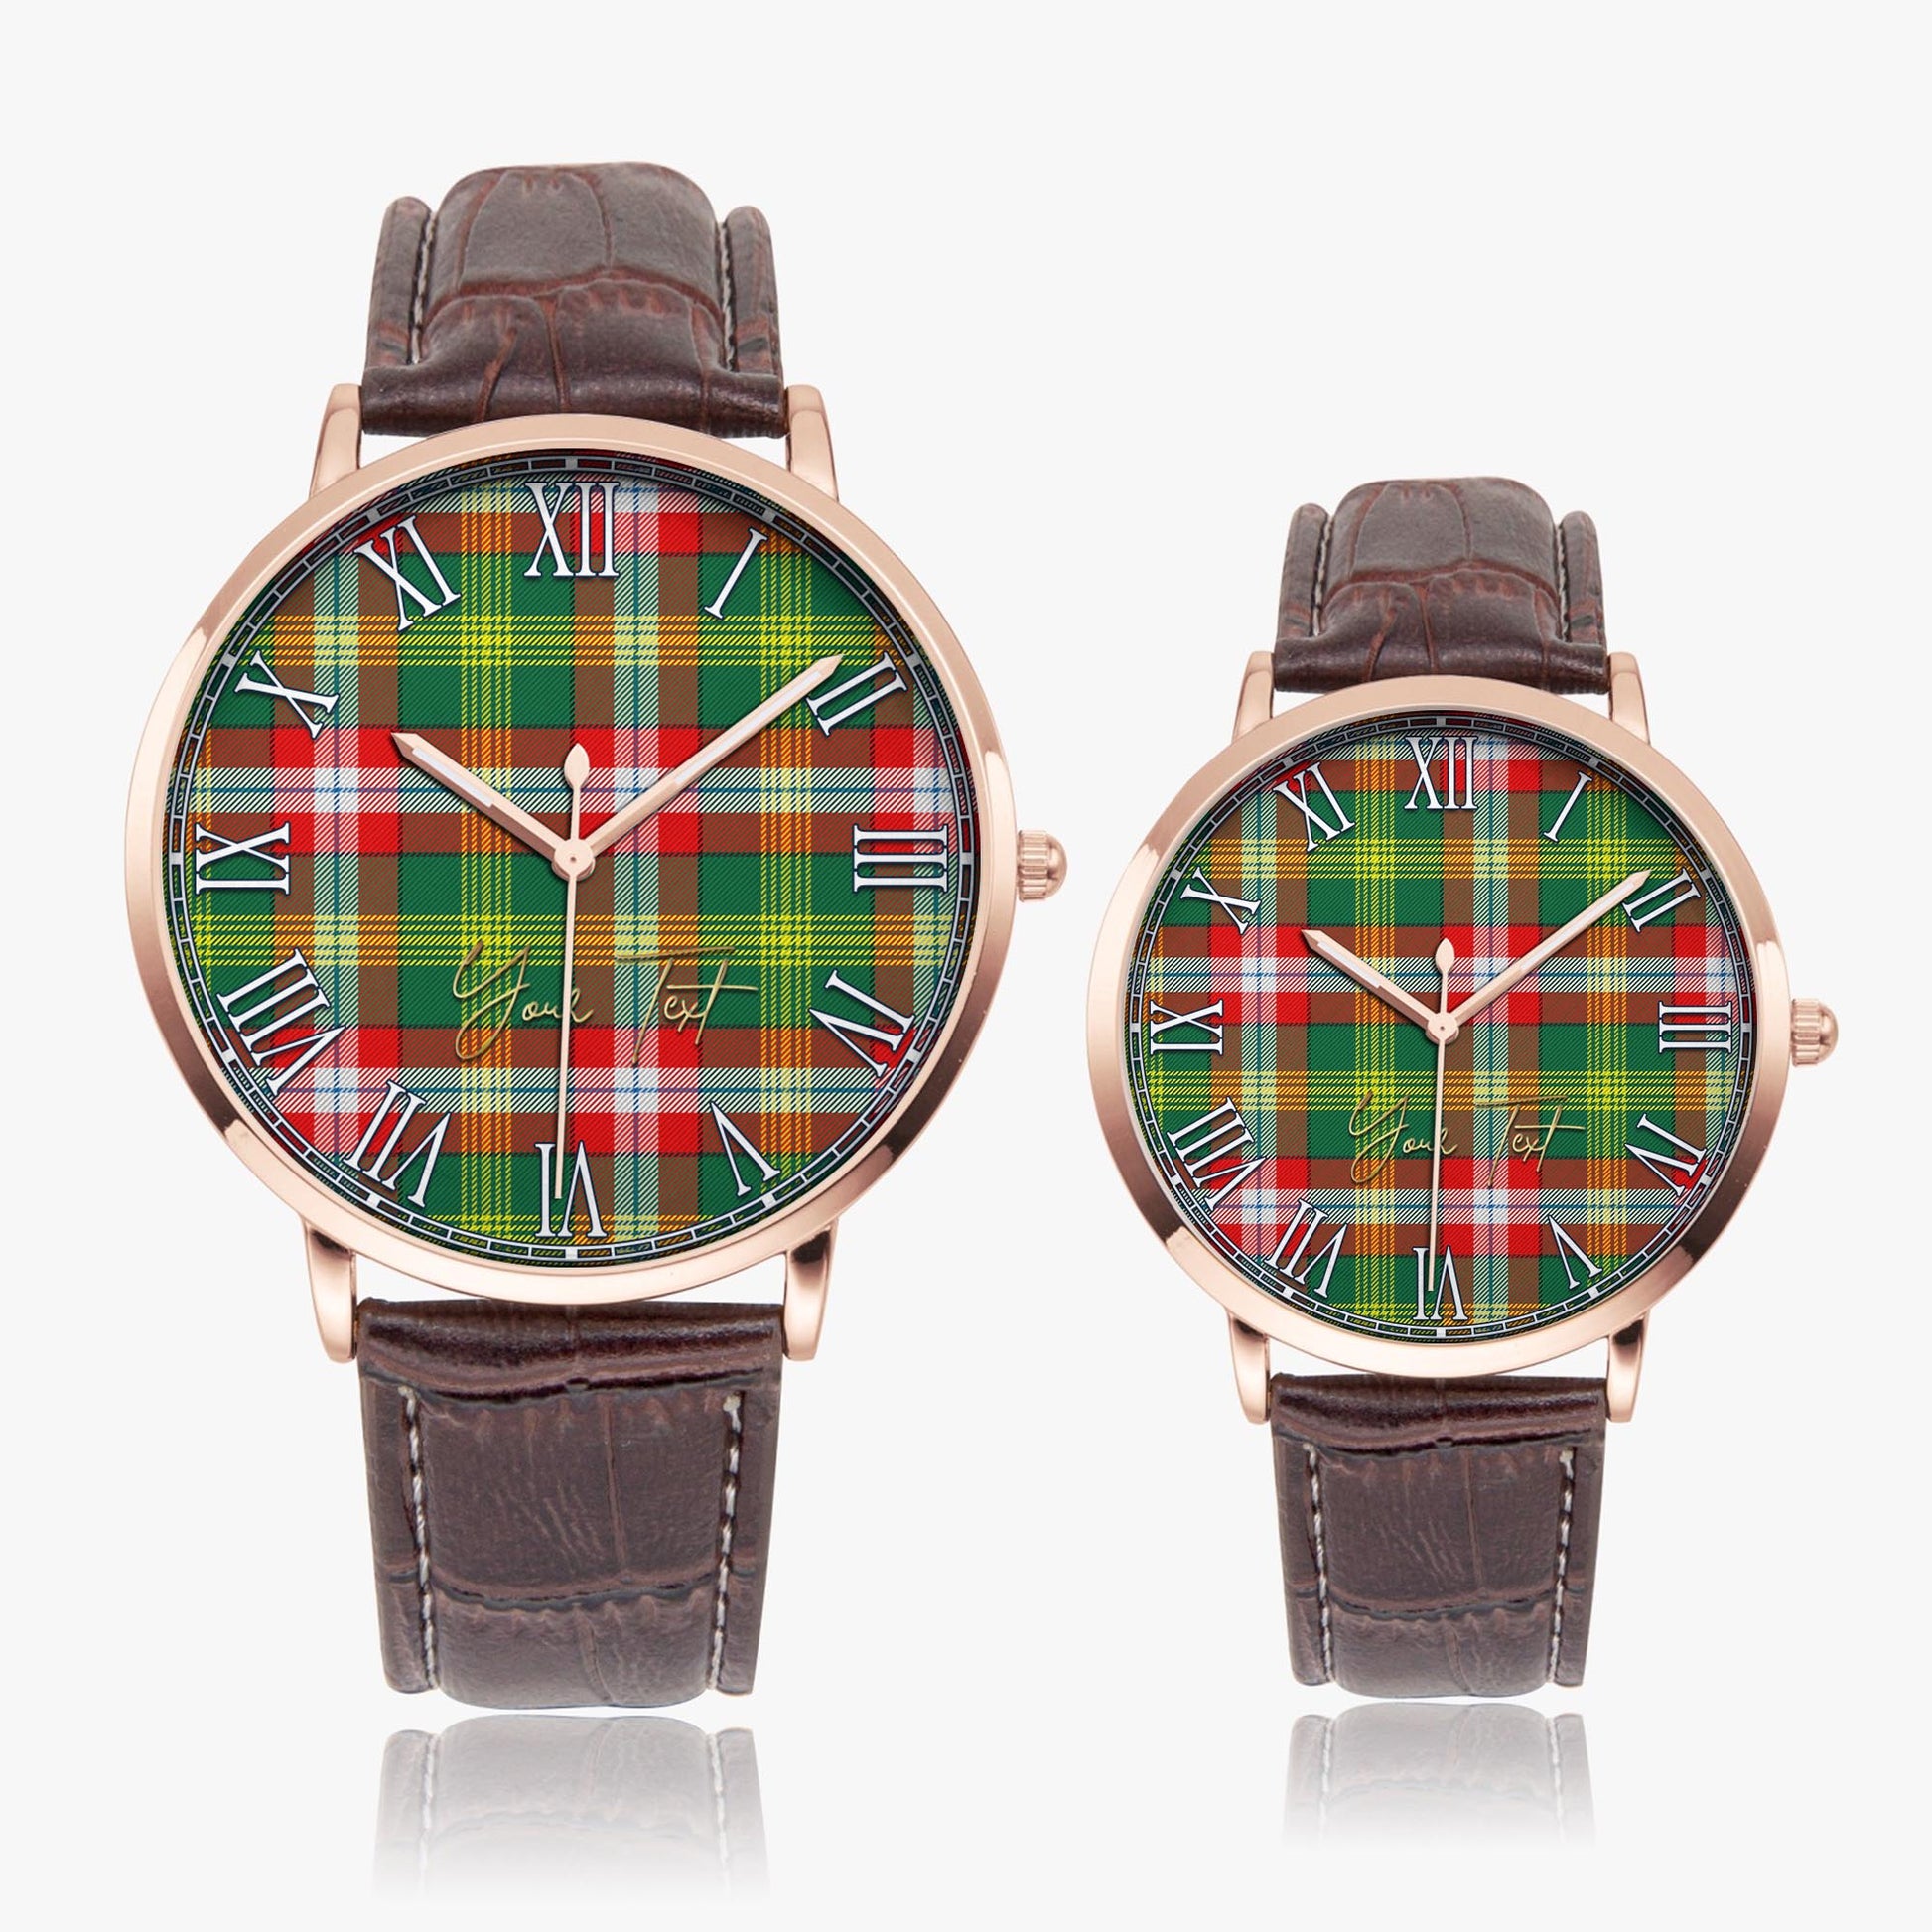 Northwest Territories Canada Tartan Personalized Your Text Leather Trap Quartz Watch Ultra Thin Rose Gold Case With Brown Leather Strap - Tartanvibesclothing